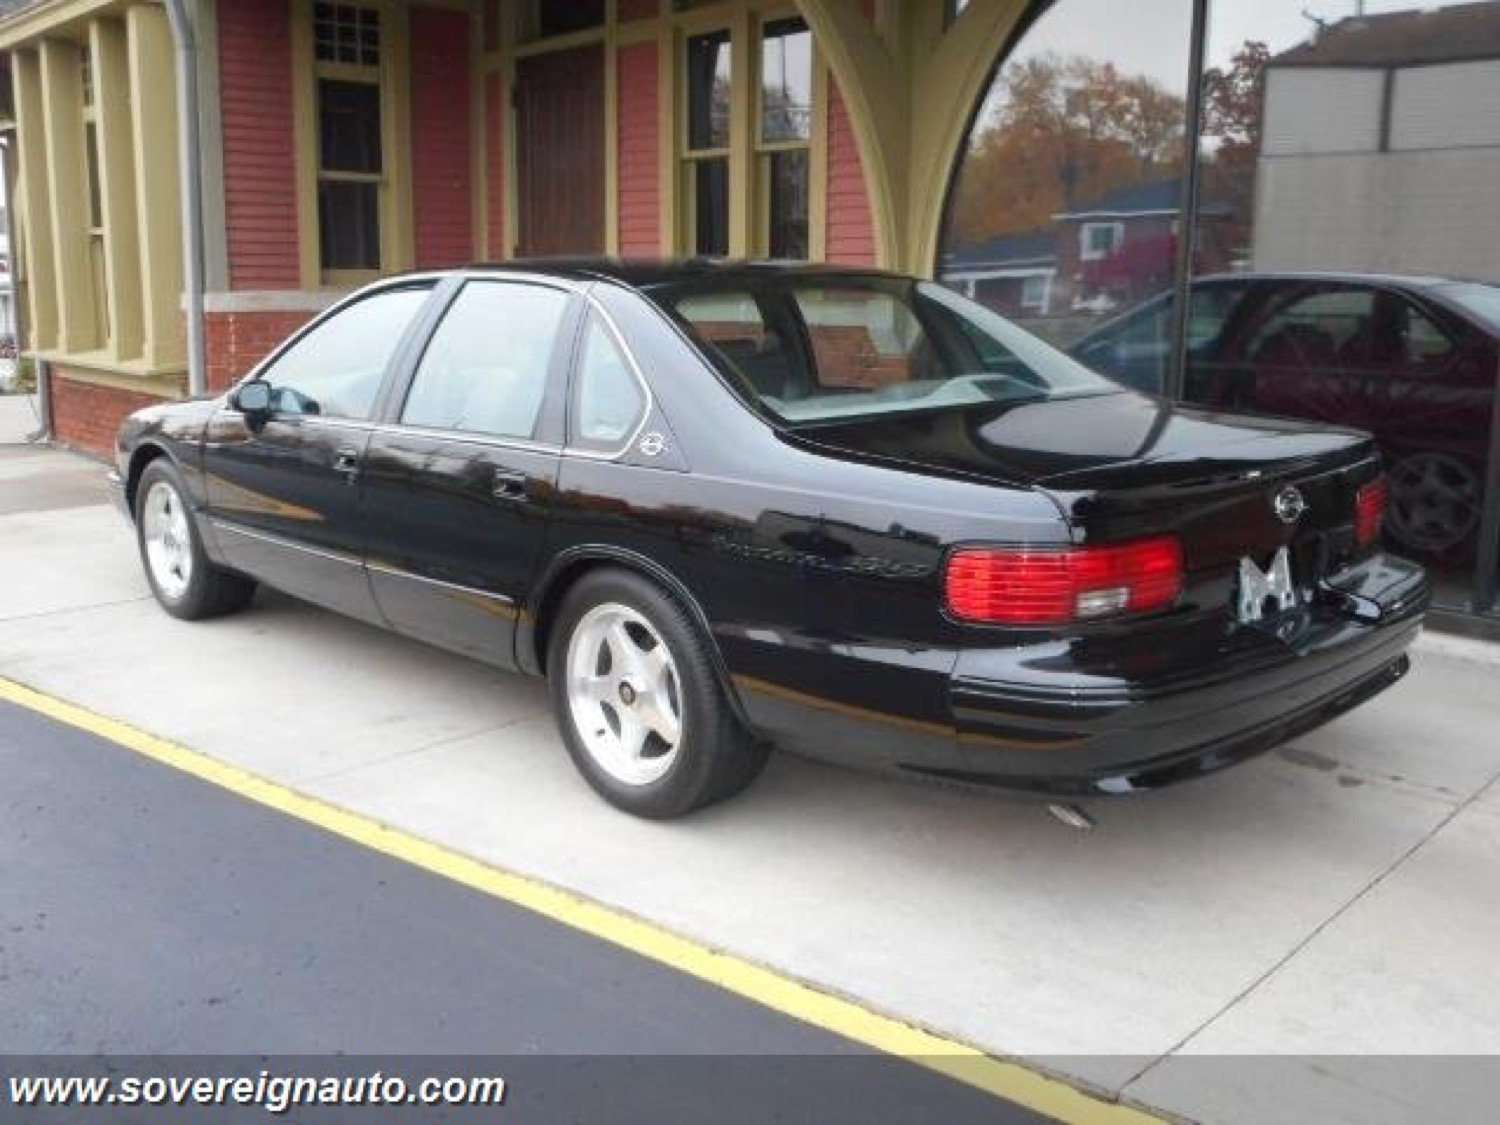 1994 Chevrolet Impala SS Just 291 Miles Up For Sale | GM Authority